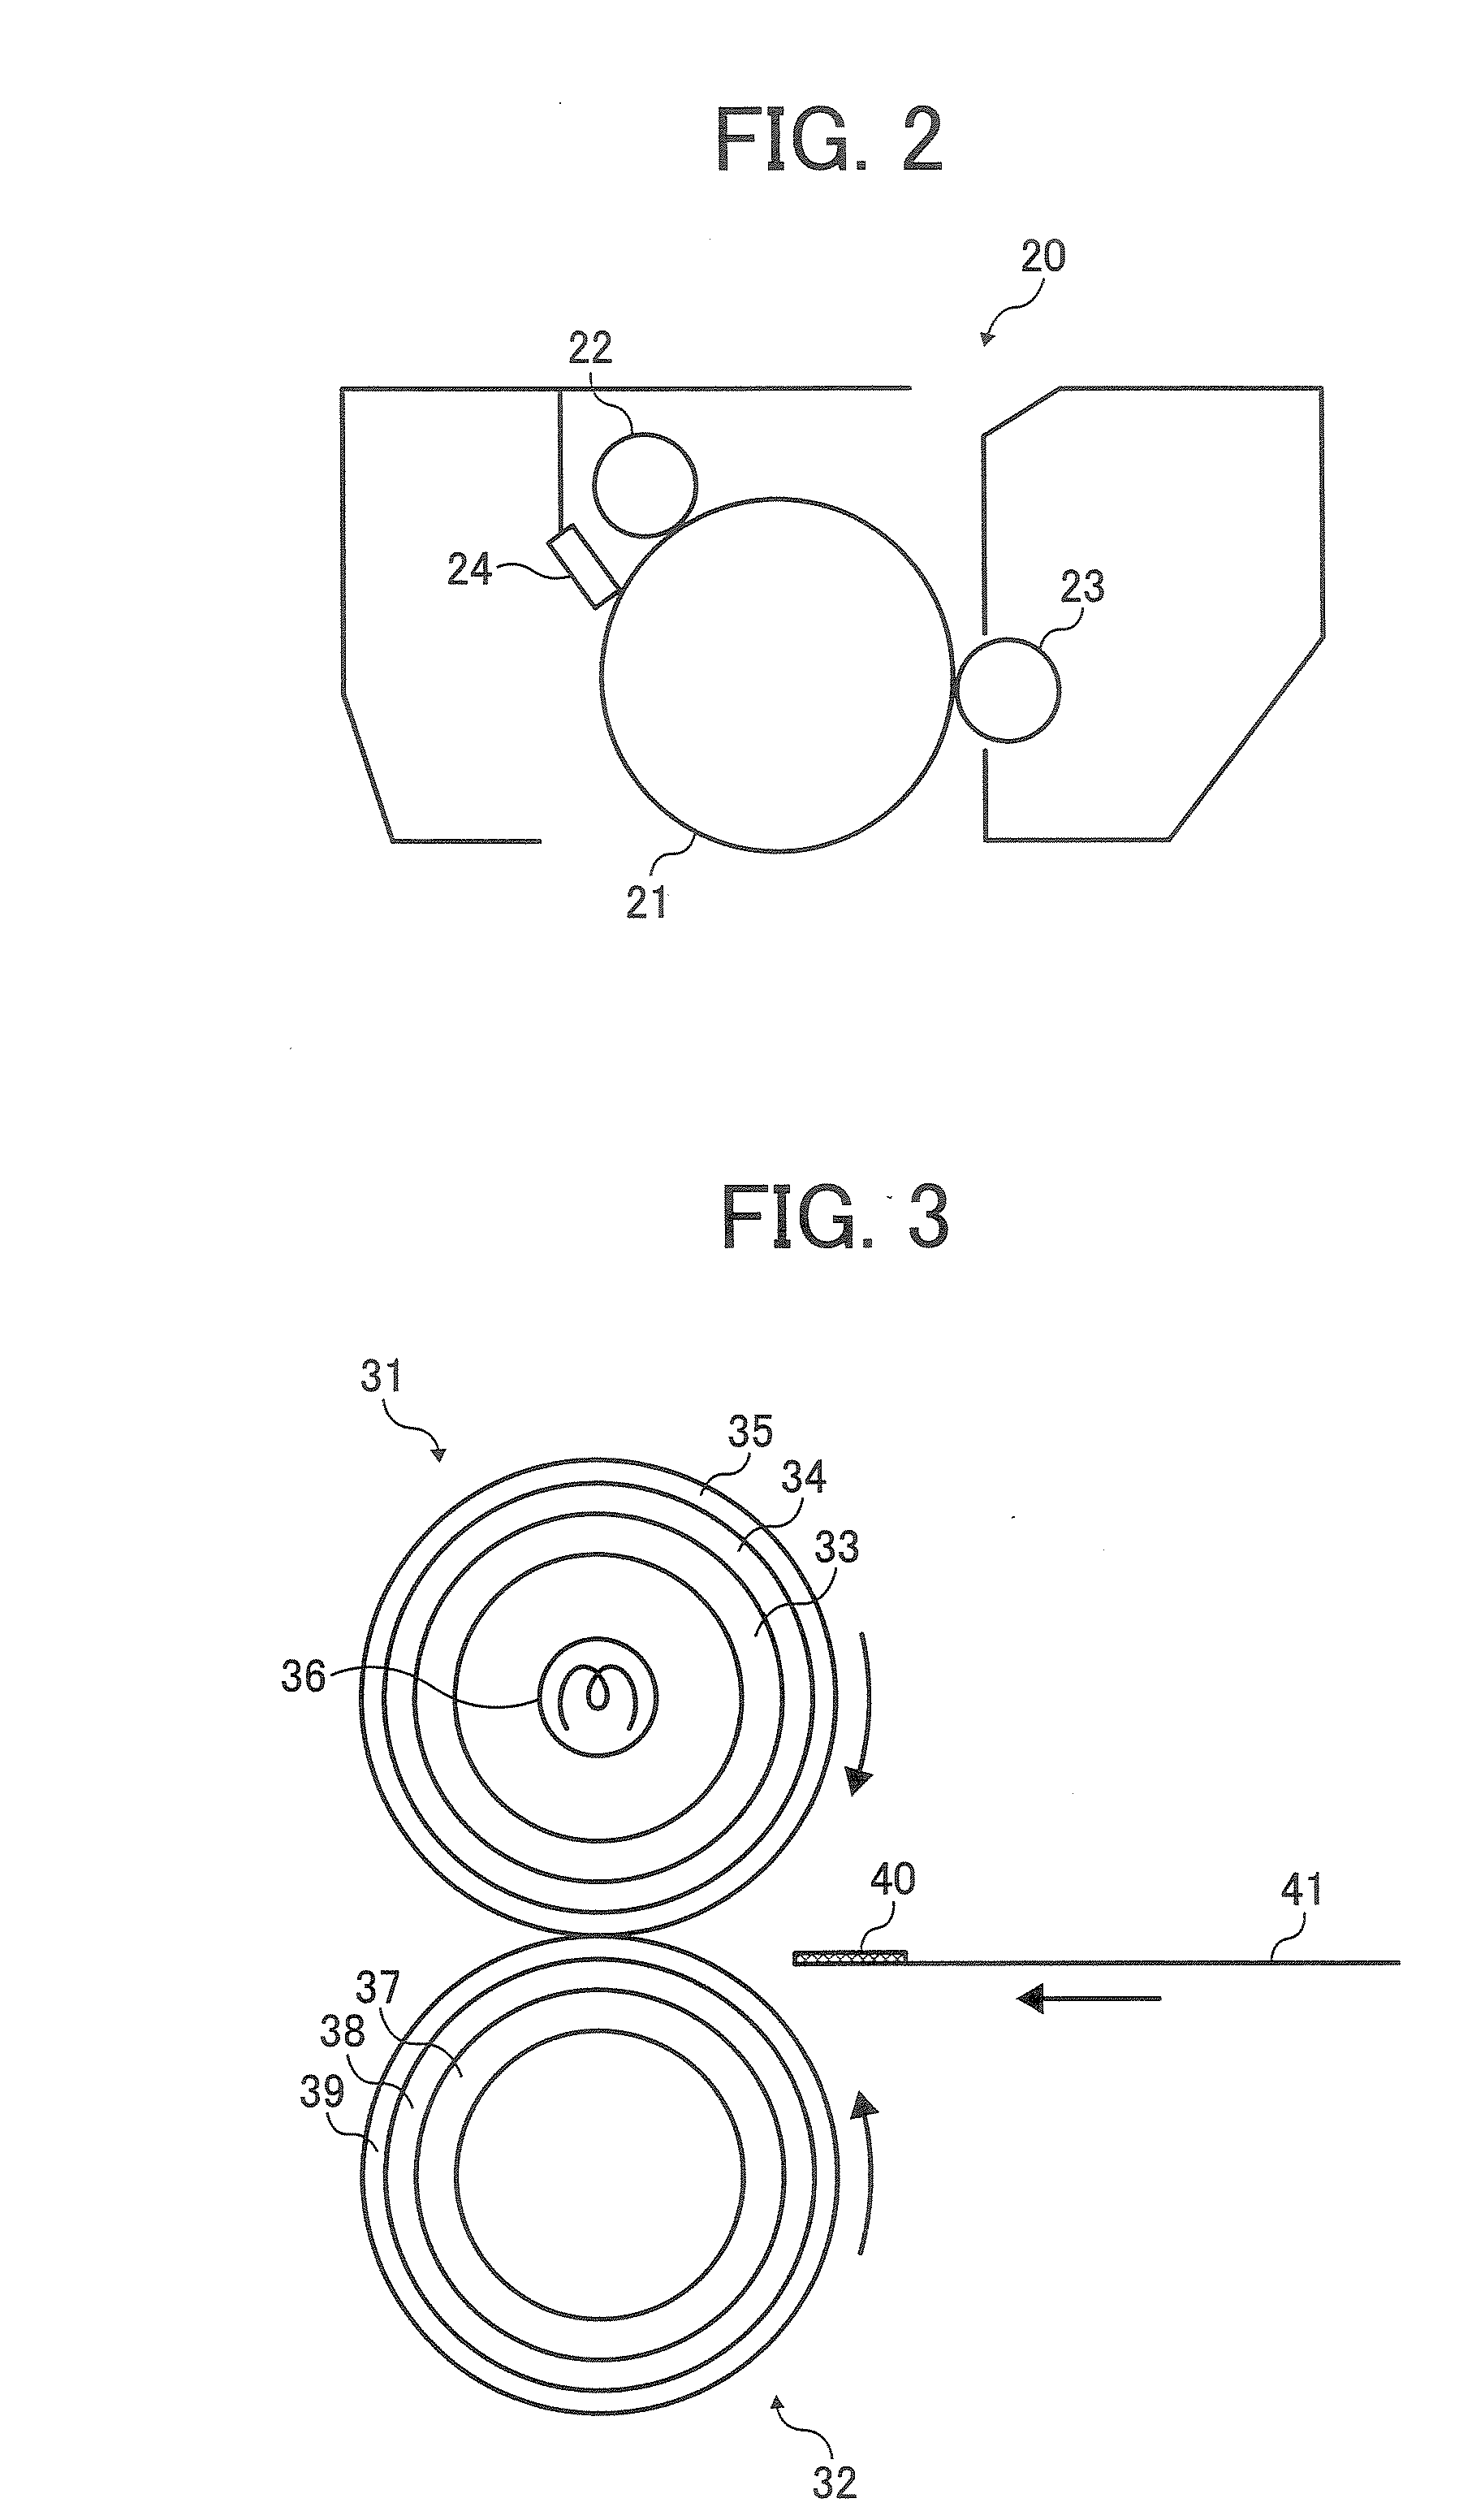 Toner, and developer, image forming method, image forming apparatus, and process cartridge using the toner